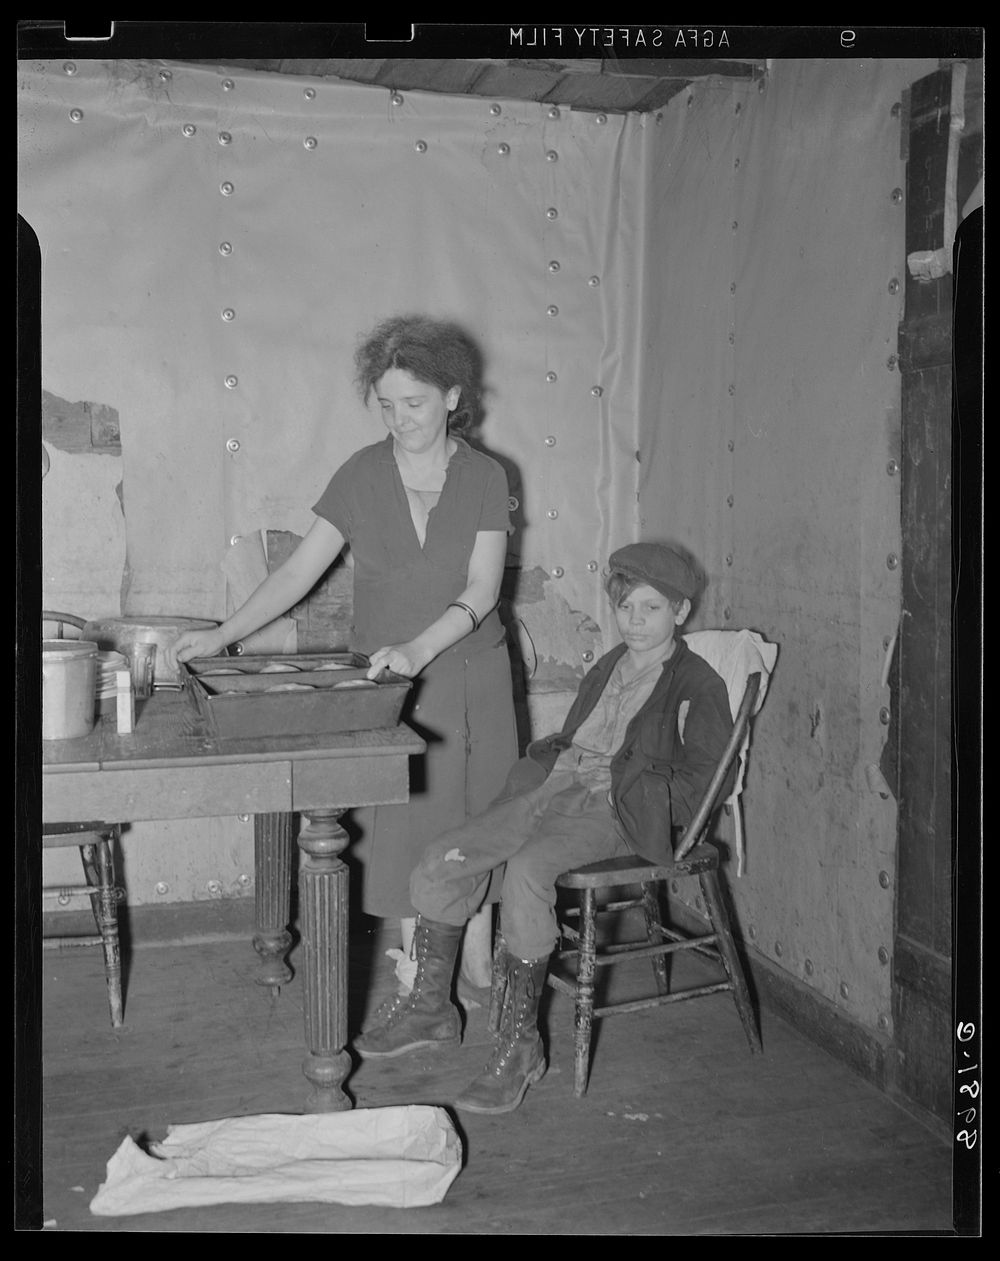 Wife and son of coal miner in kitchen of their home. Kempton, West Virginia. Sourced from the Library of Congress.